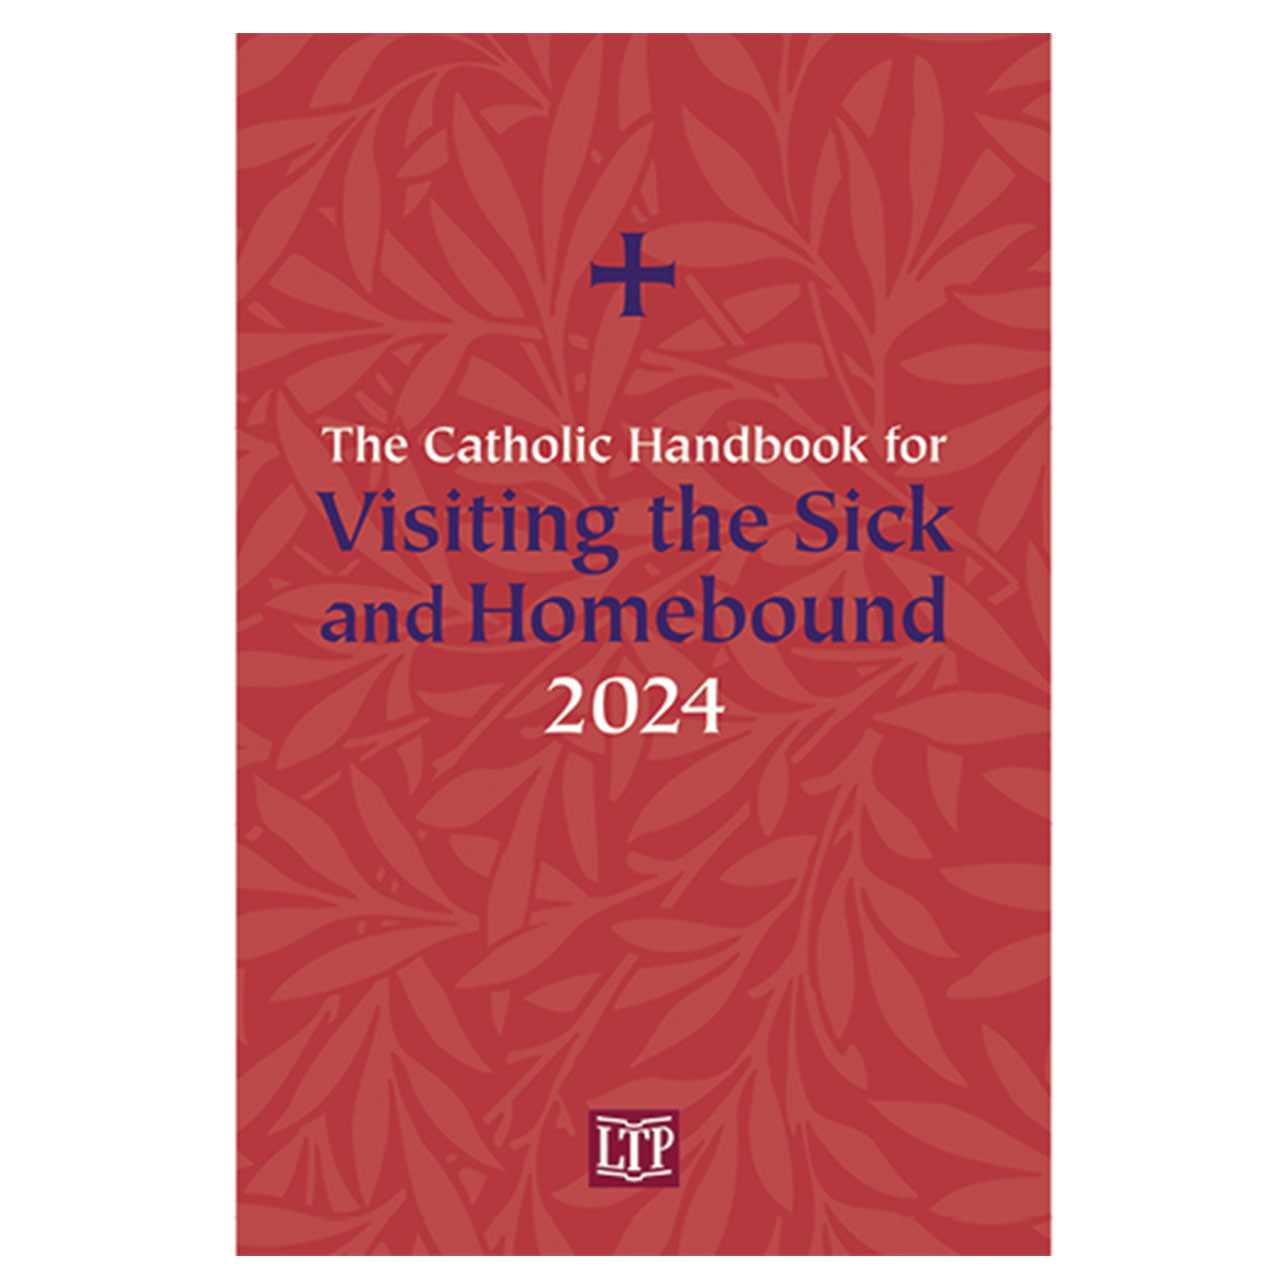 Current Catholic Handbook Visiting the Sick and Homebound Publication